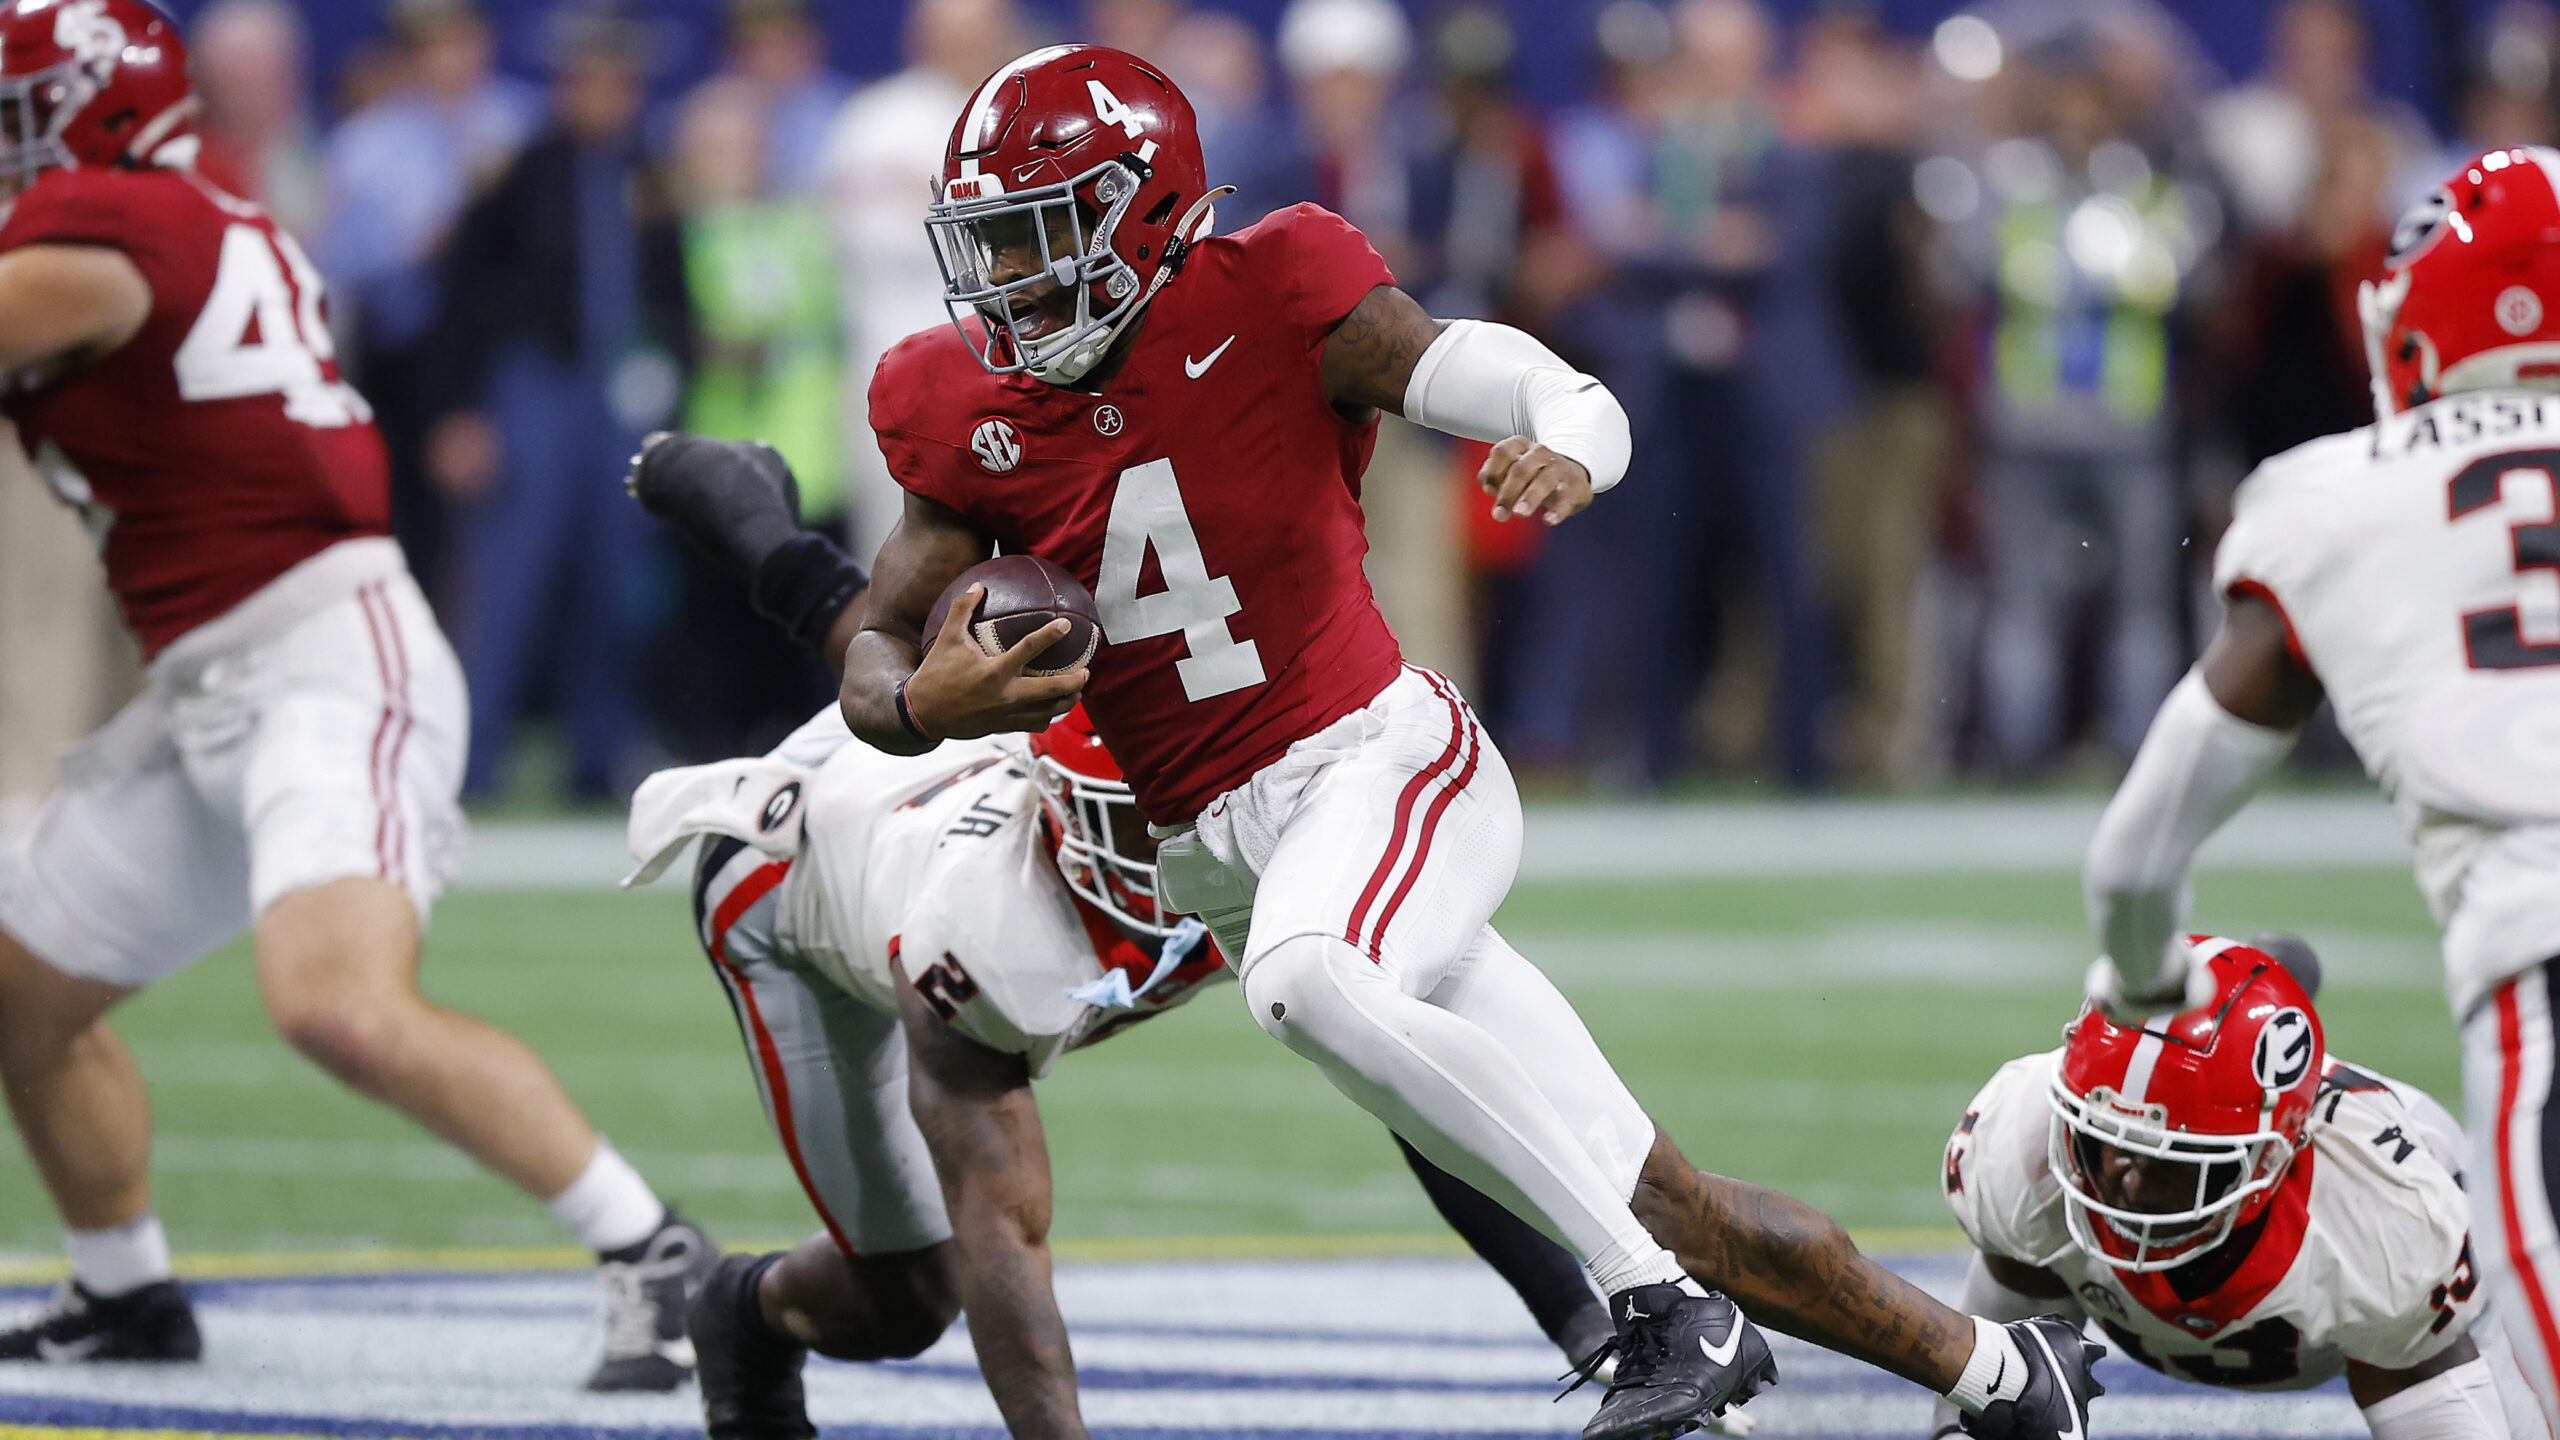 What to know about the New Year’s Day college football semifinals